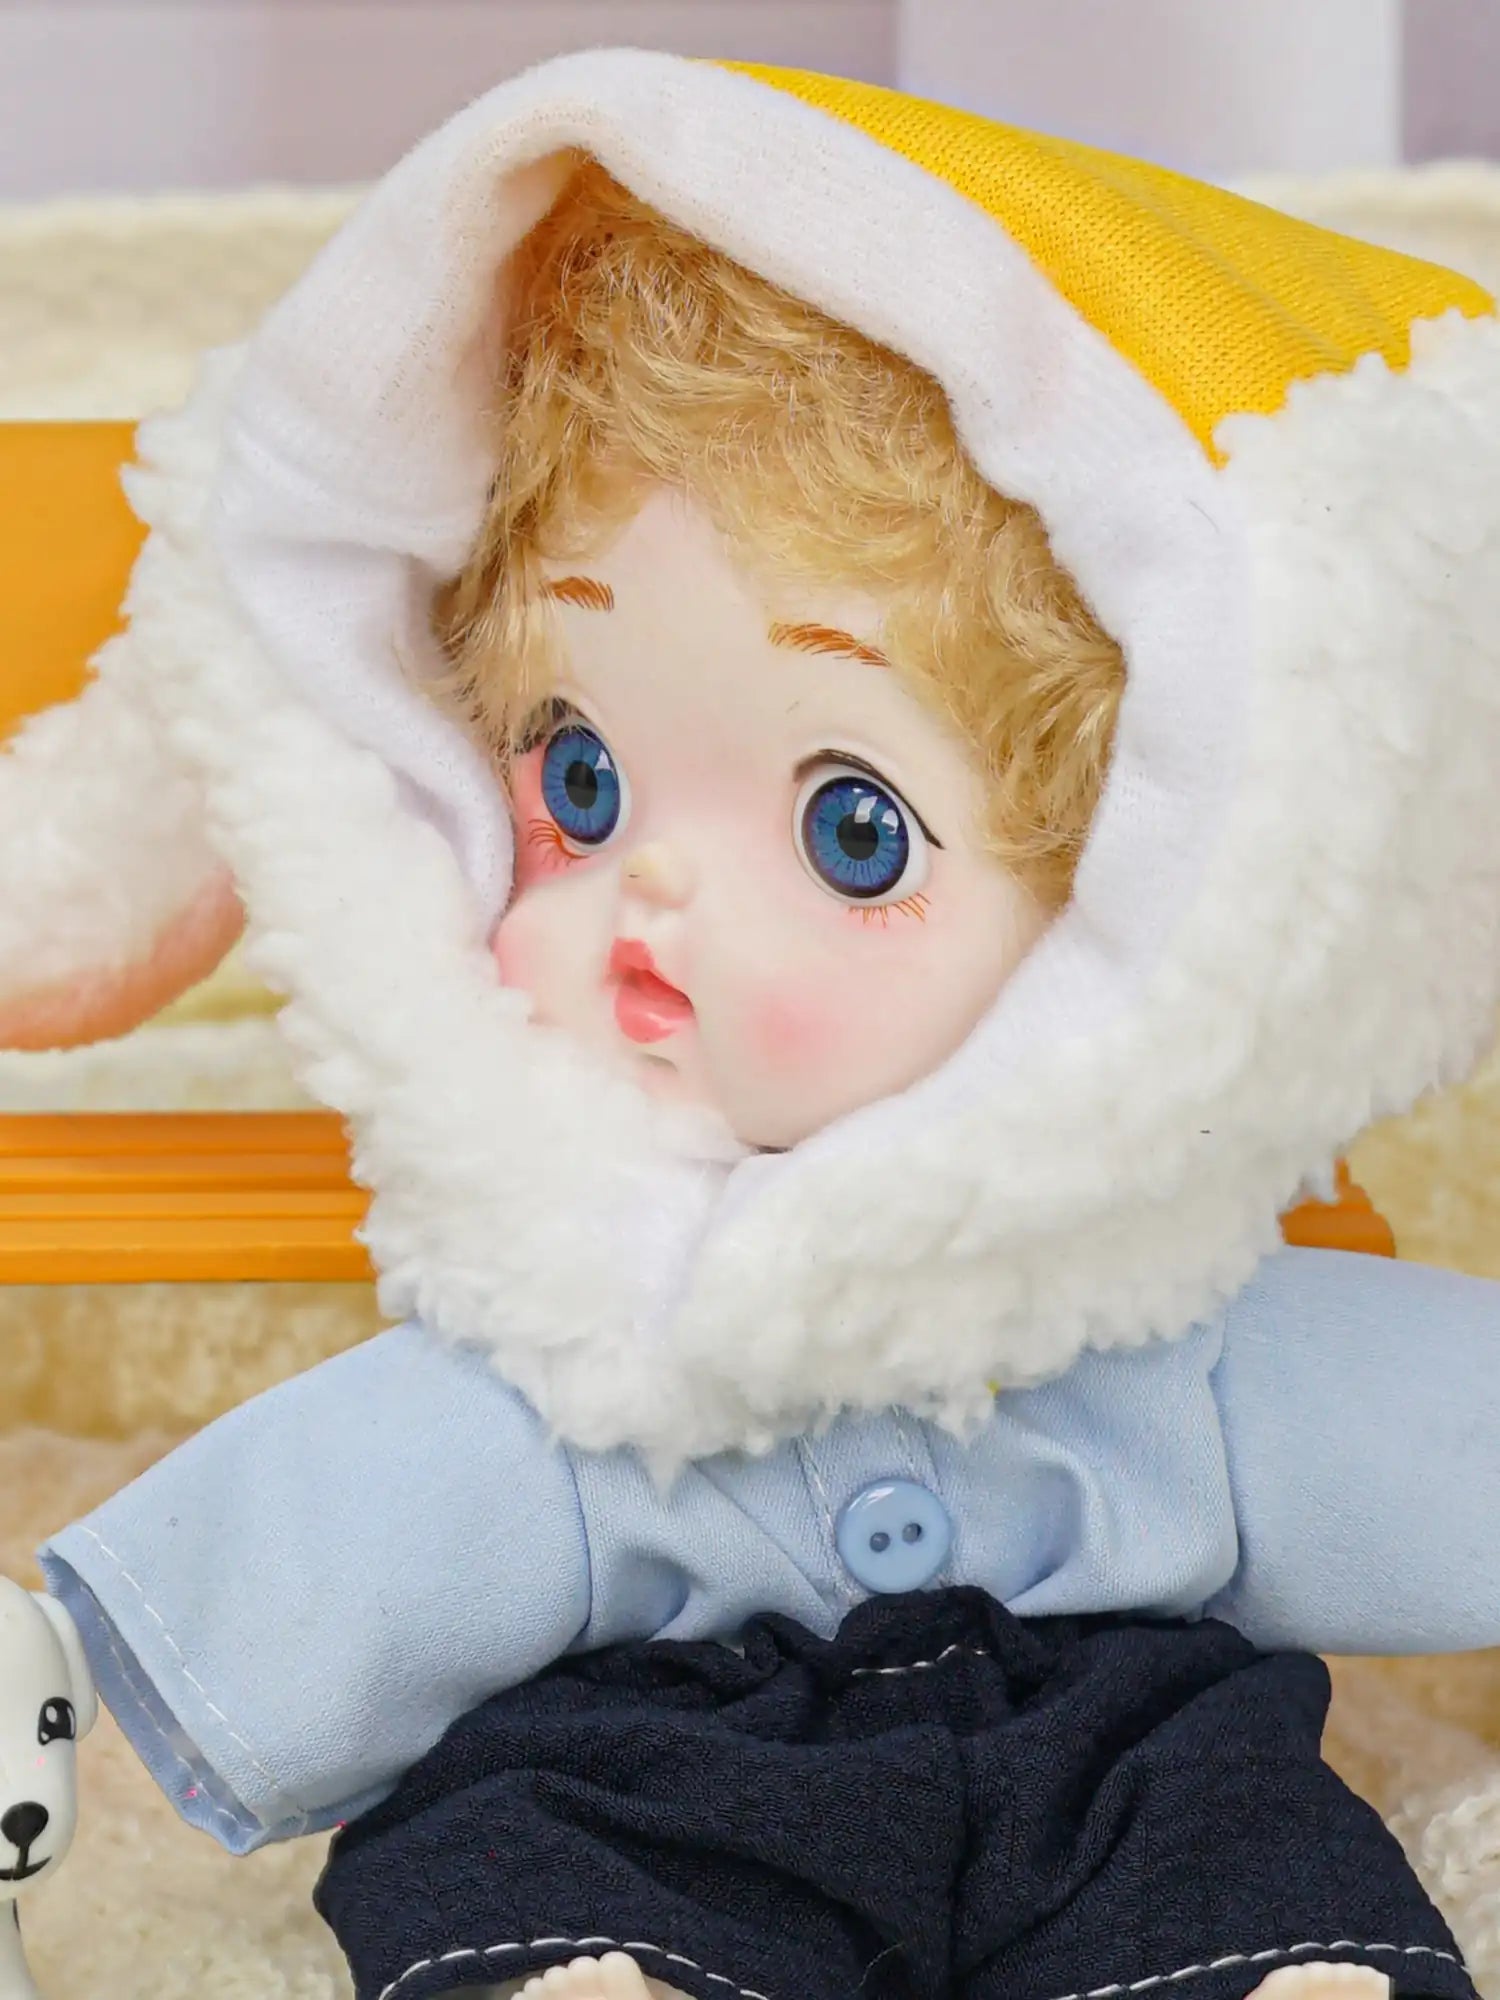 An adorable doll with a fluffy lamb headgear and a pair of bright eyes, sharing space with a little toy canine.